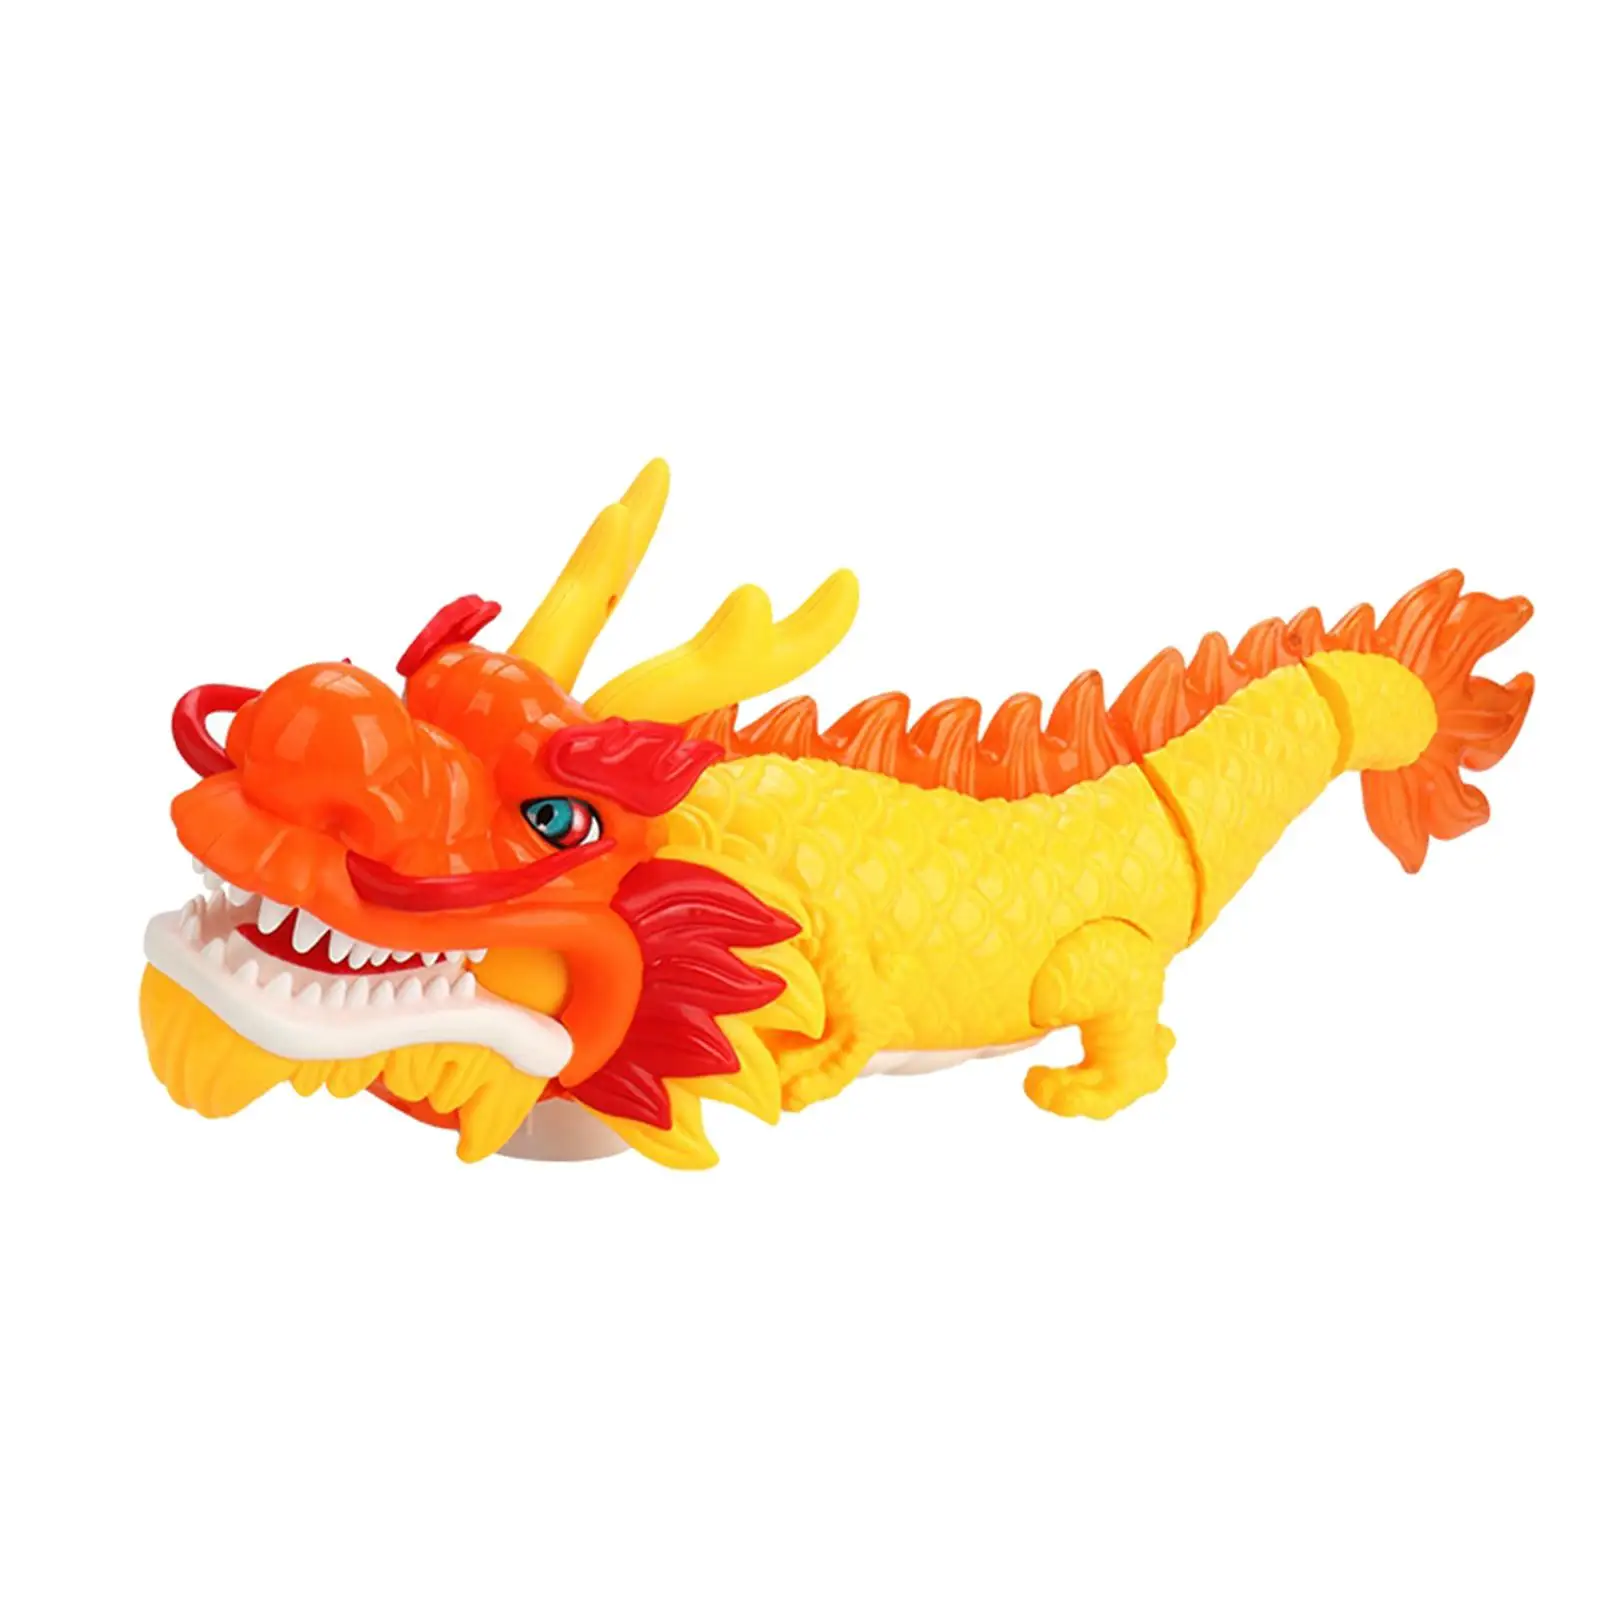 Eletric Dragon Toy Realistic Creative Mechanical Dragons Toy Gifts Animal Flexible for Adults Children Kid Age 8-12 Girls